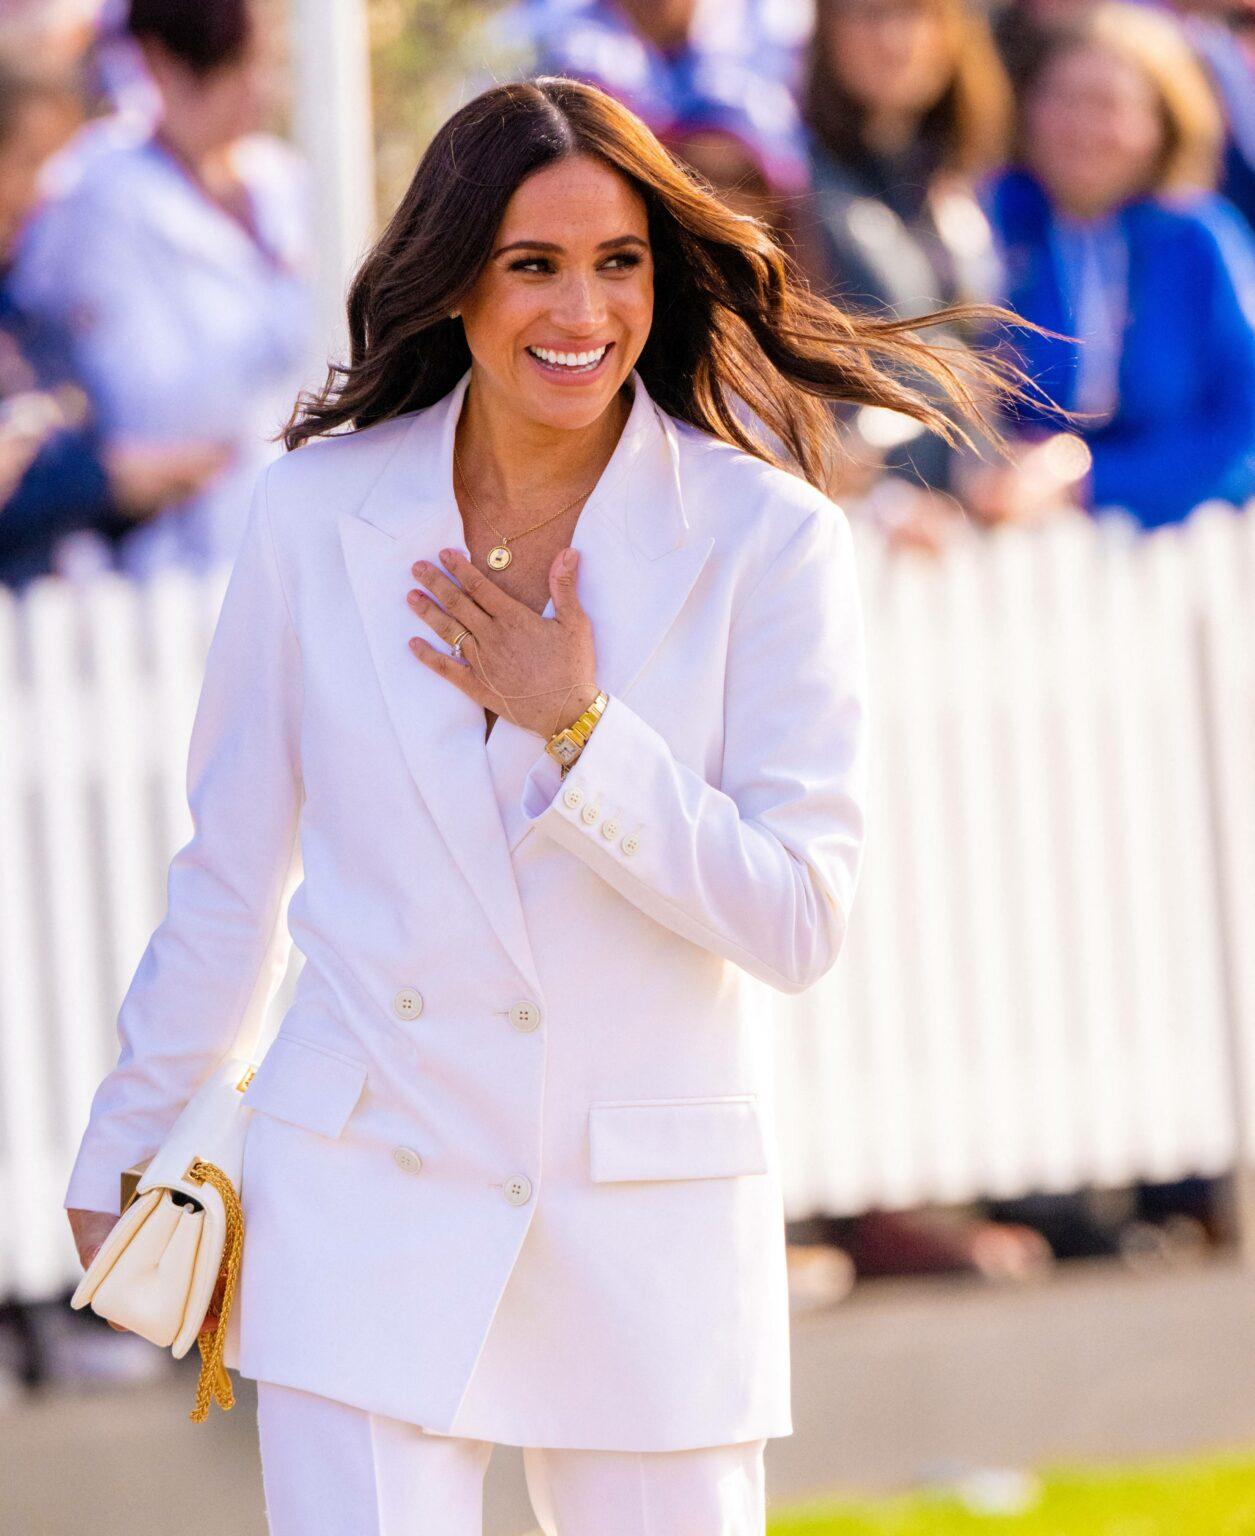 Fans Gush Over Meghan Markle's Look For Navy SEALs Event